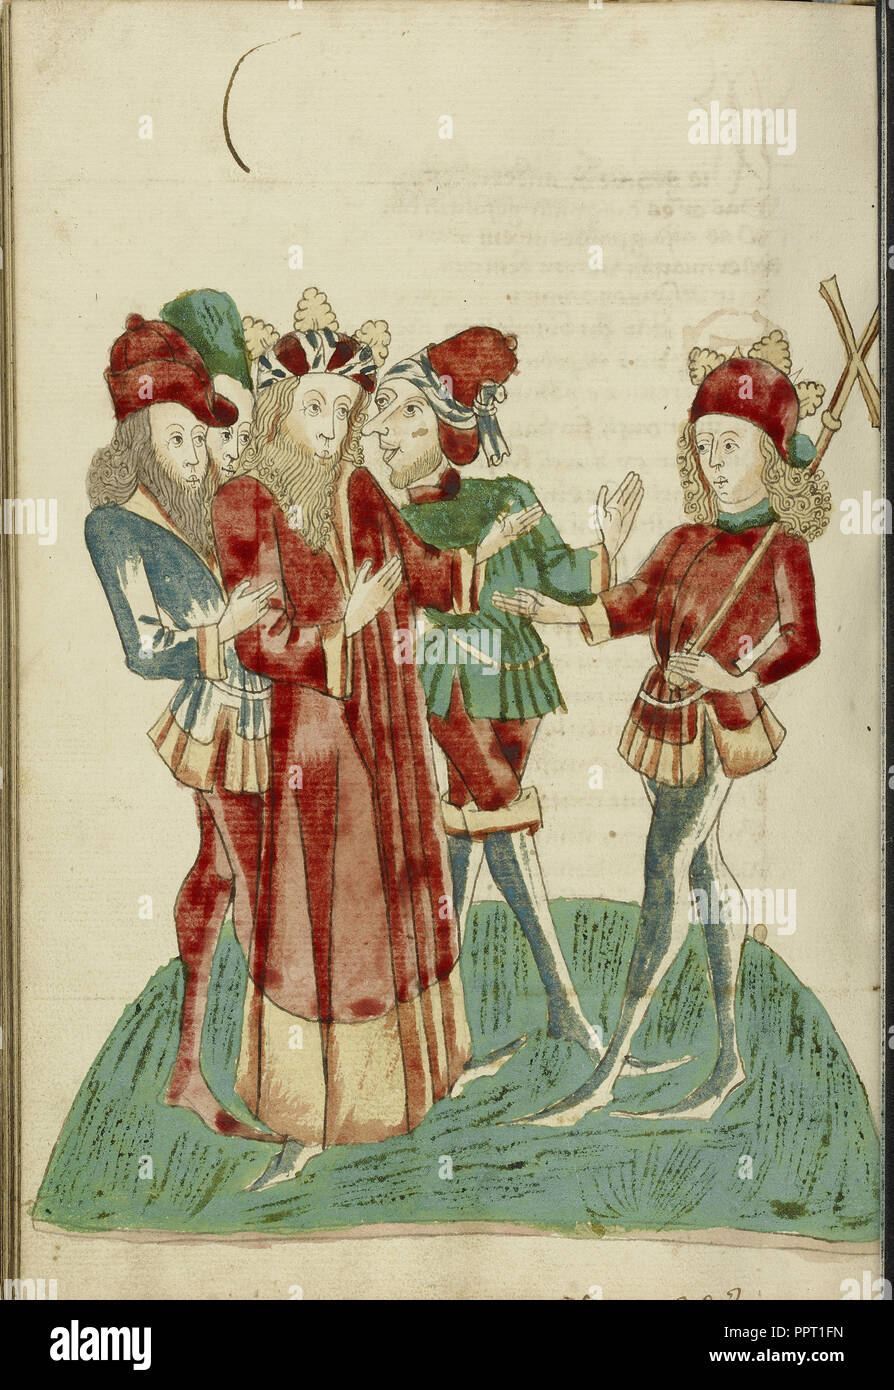 King Avenir with Courtiers Converses with Josaphat; Follower of Hans Schilling, German, active 1459 - 1467) Stock Photo